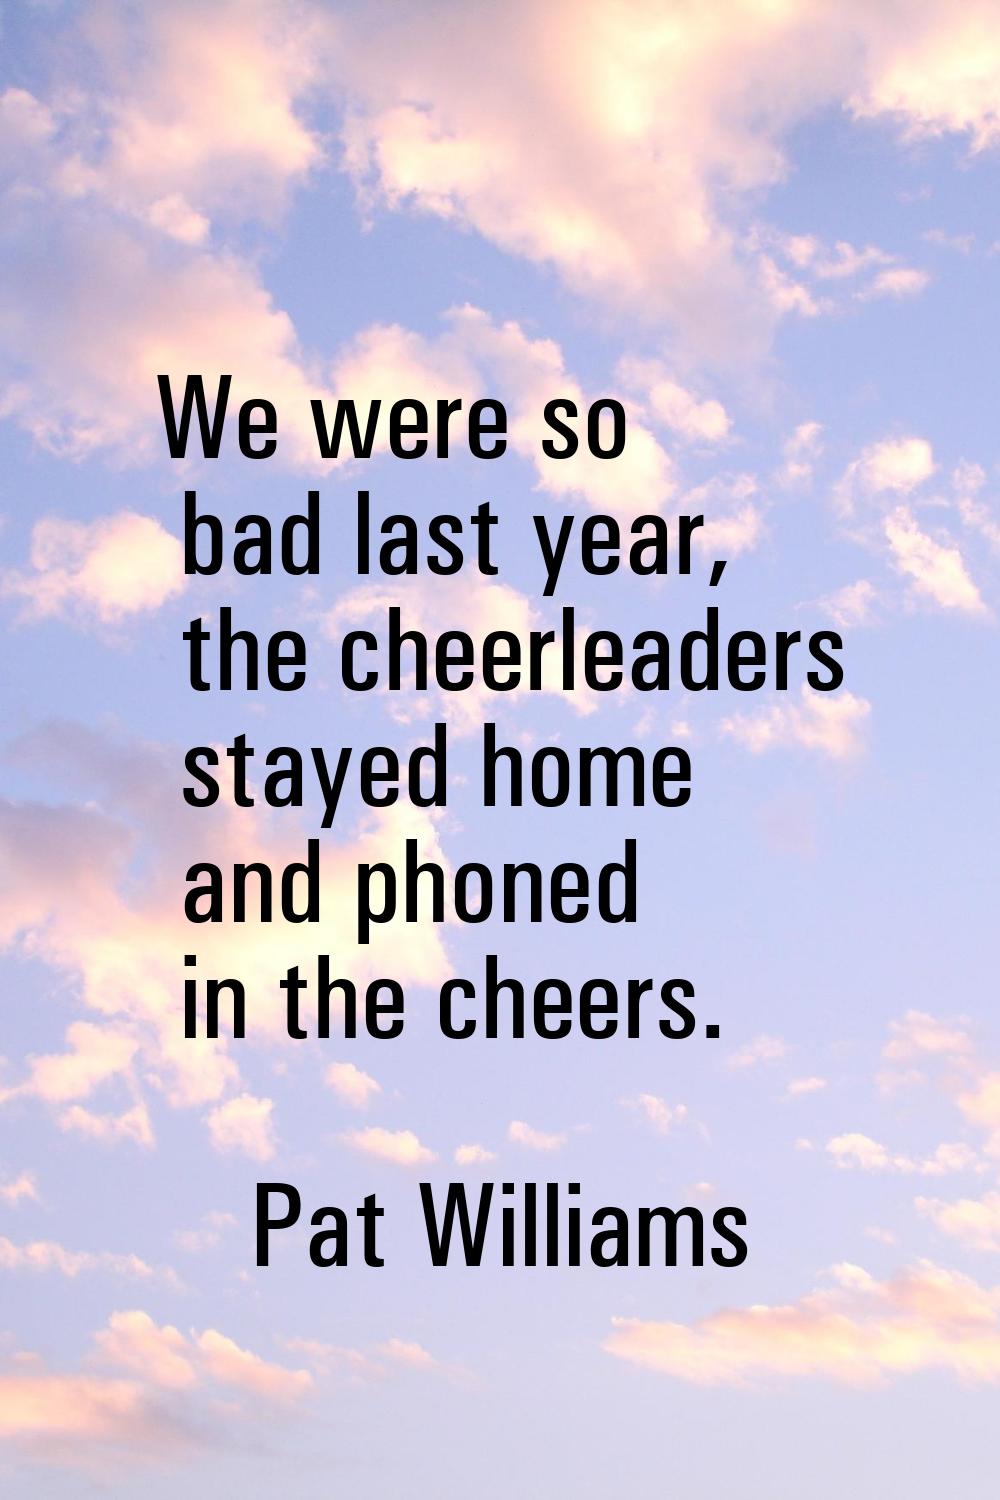 We were so bad last year, the cheerleaders stayed home and phoned in the cheers.